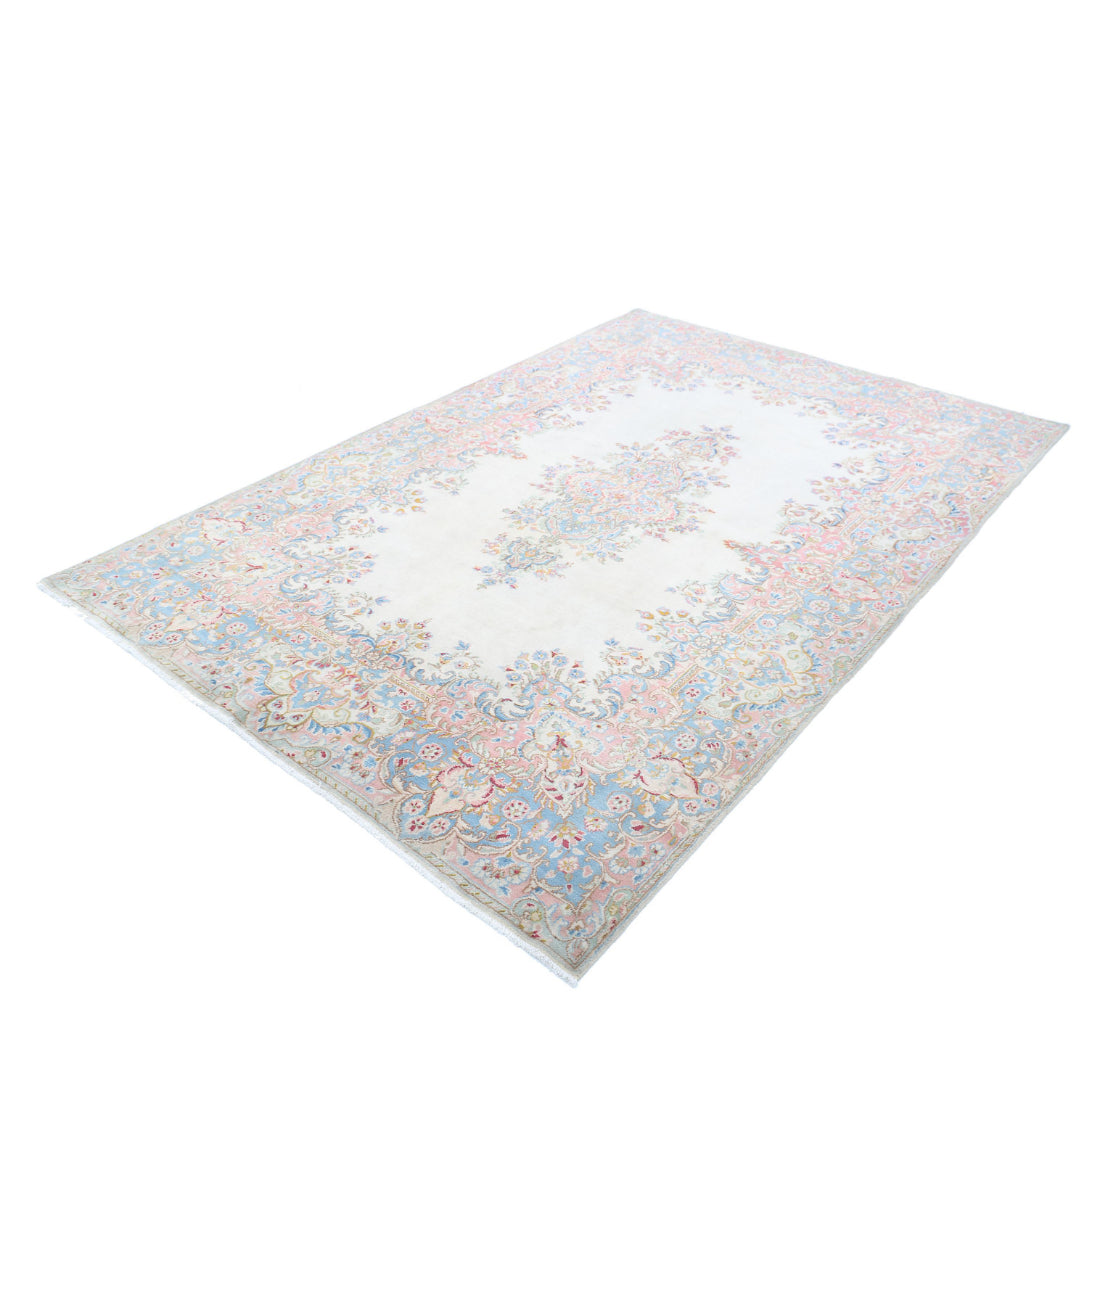 Hand Knotted Persian Kerman Wool Rug - 5'10'' x 8'11'' 5'10'' x 8'11'' (175 X 268) / Ivory / Blue